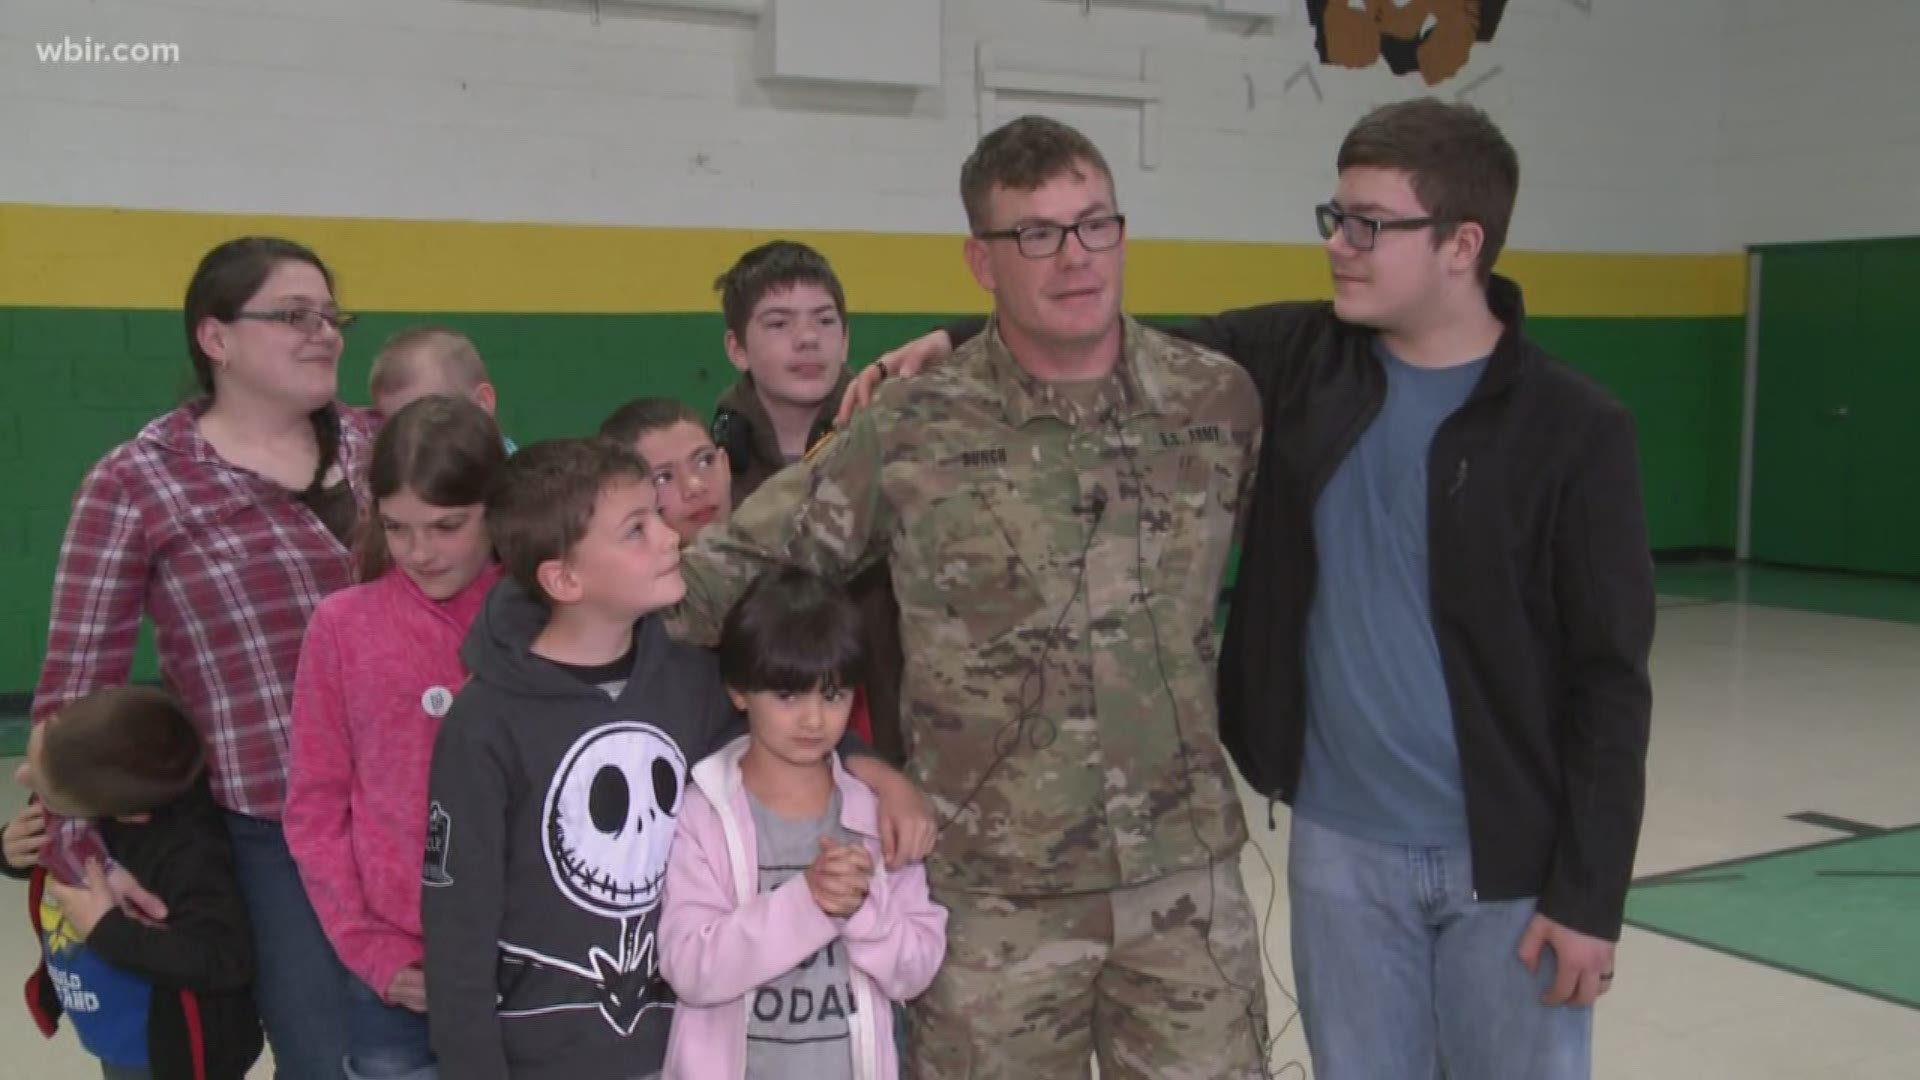 Homecomings for soldiers and their families are always heartwarming, and it was no different for an East Tennessee family today.